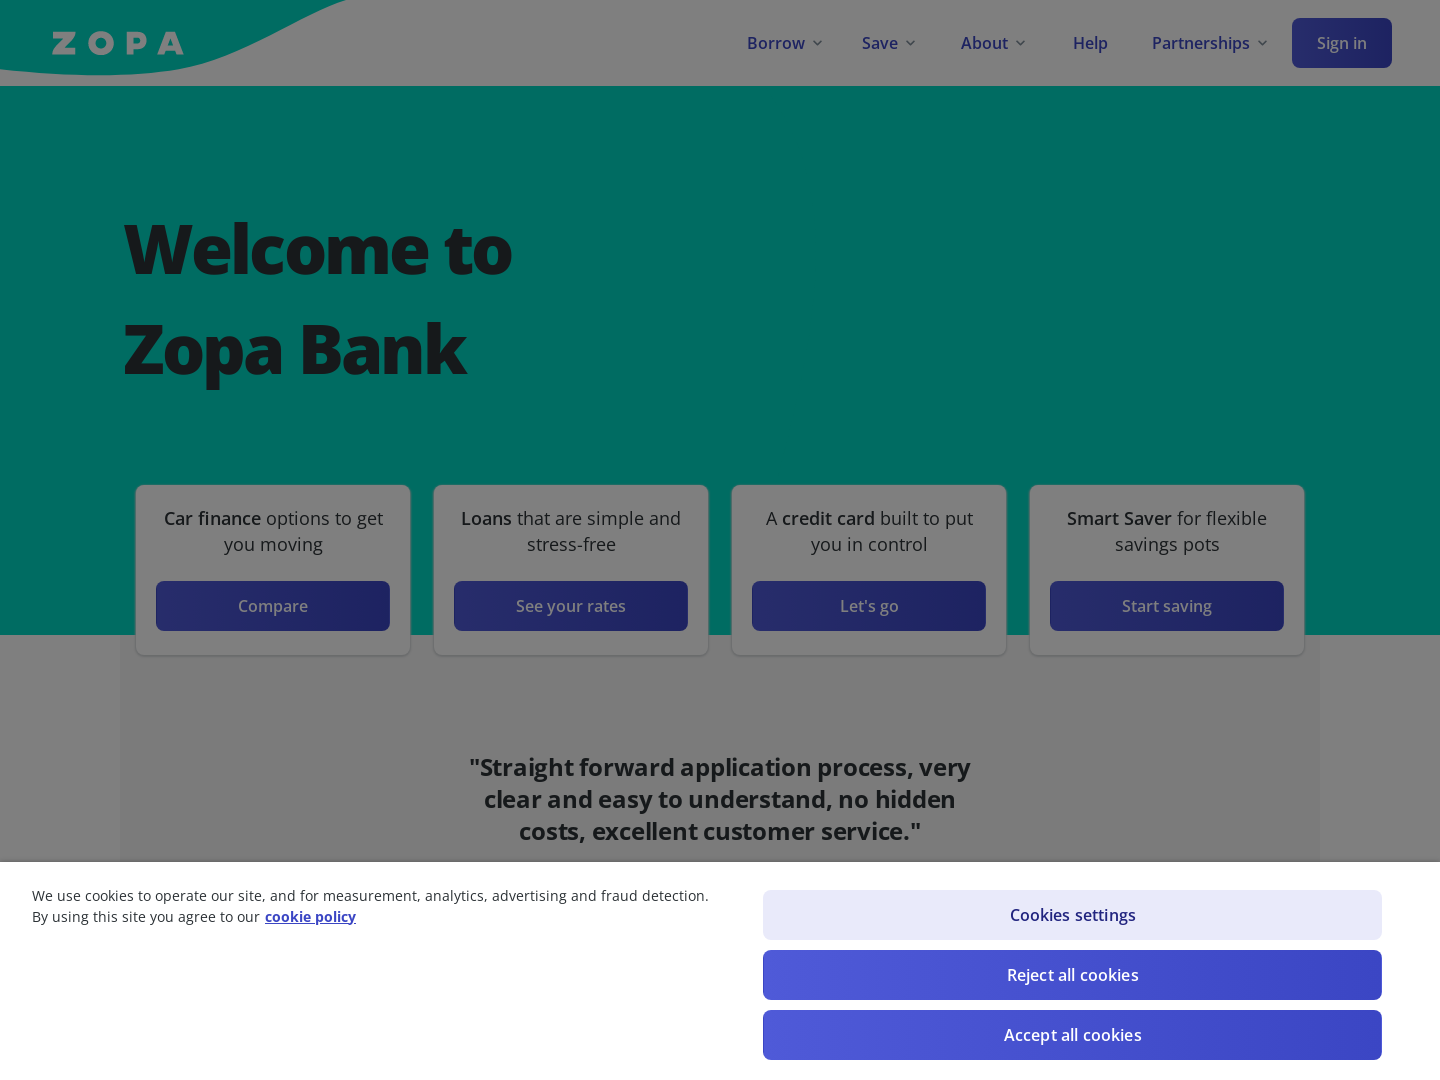 Zopa Bank Raises £75M in Funding to Drive Expansion